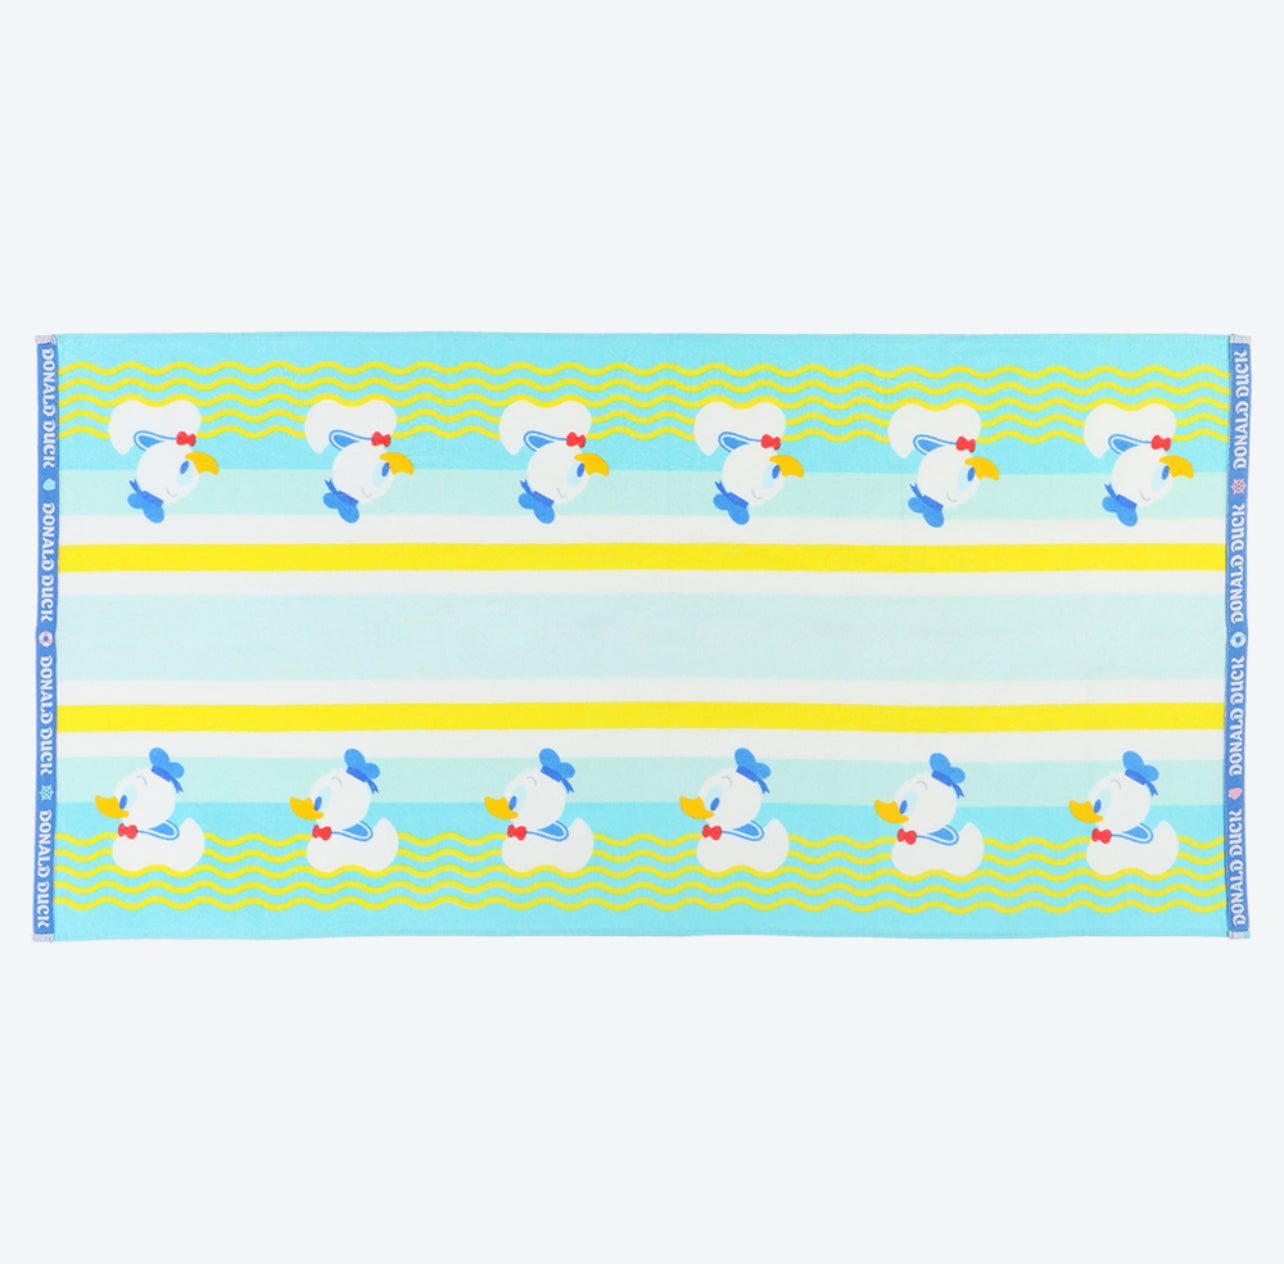 TDR - "Donald Duck Cheerful Voice & Cute White Bottom" Collection - Bath Towel (Release Date:May 18)